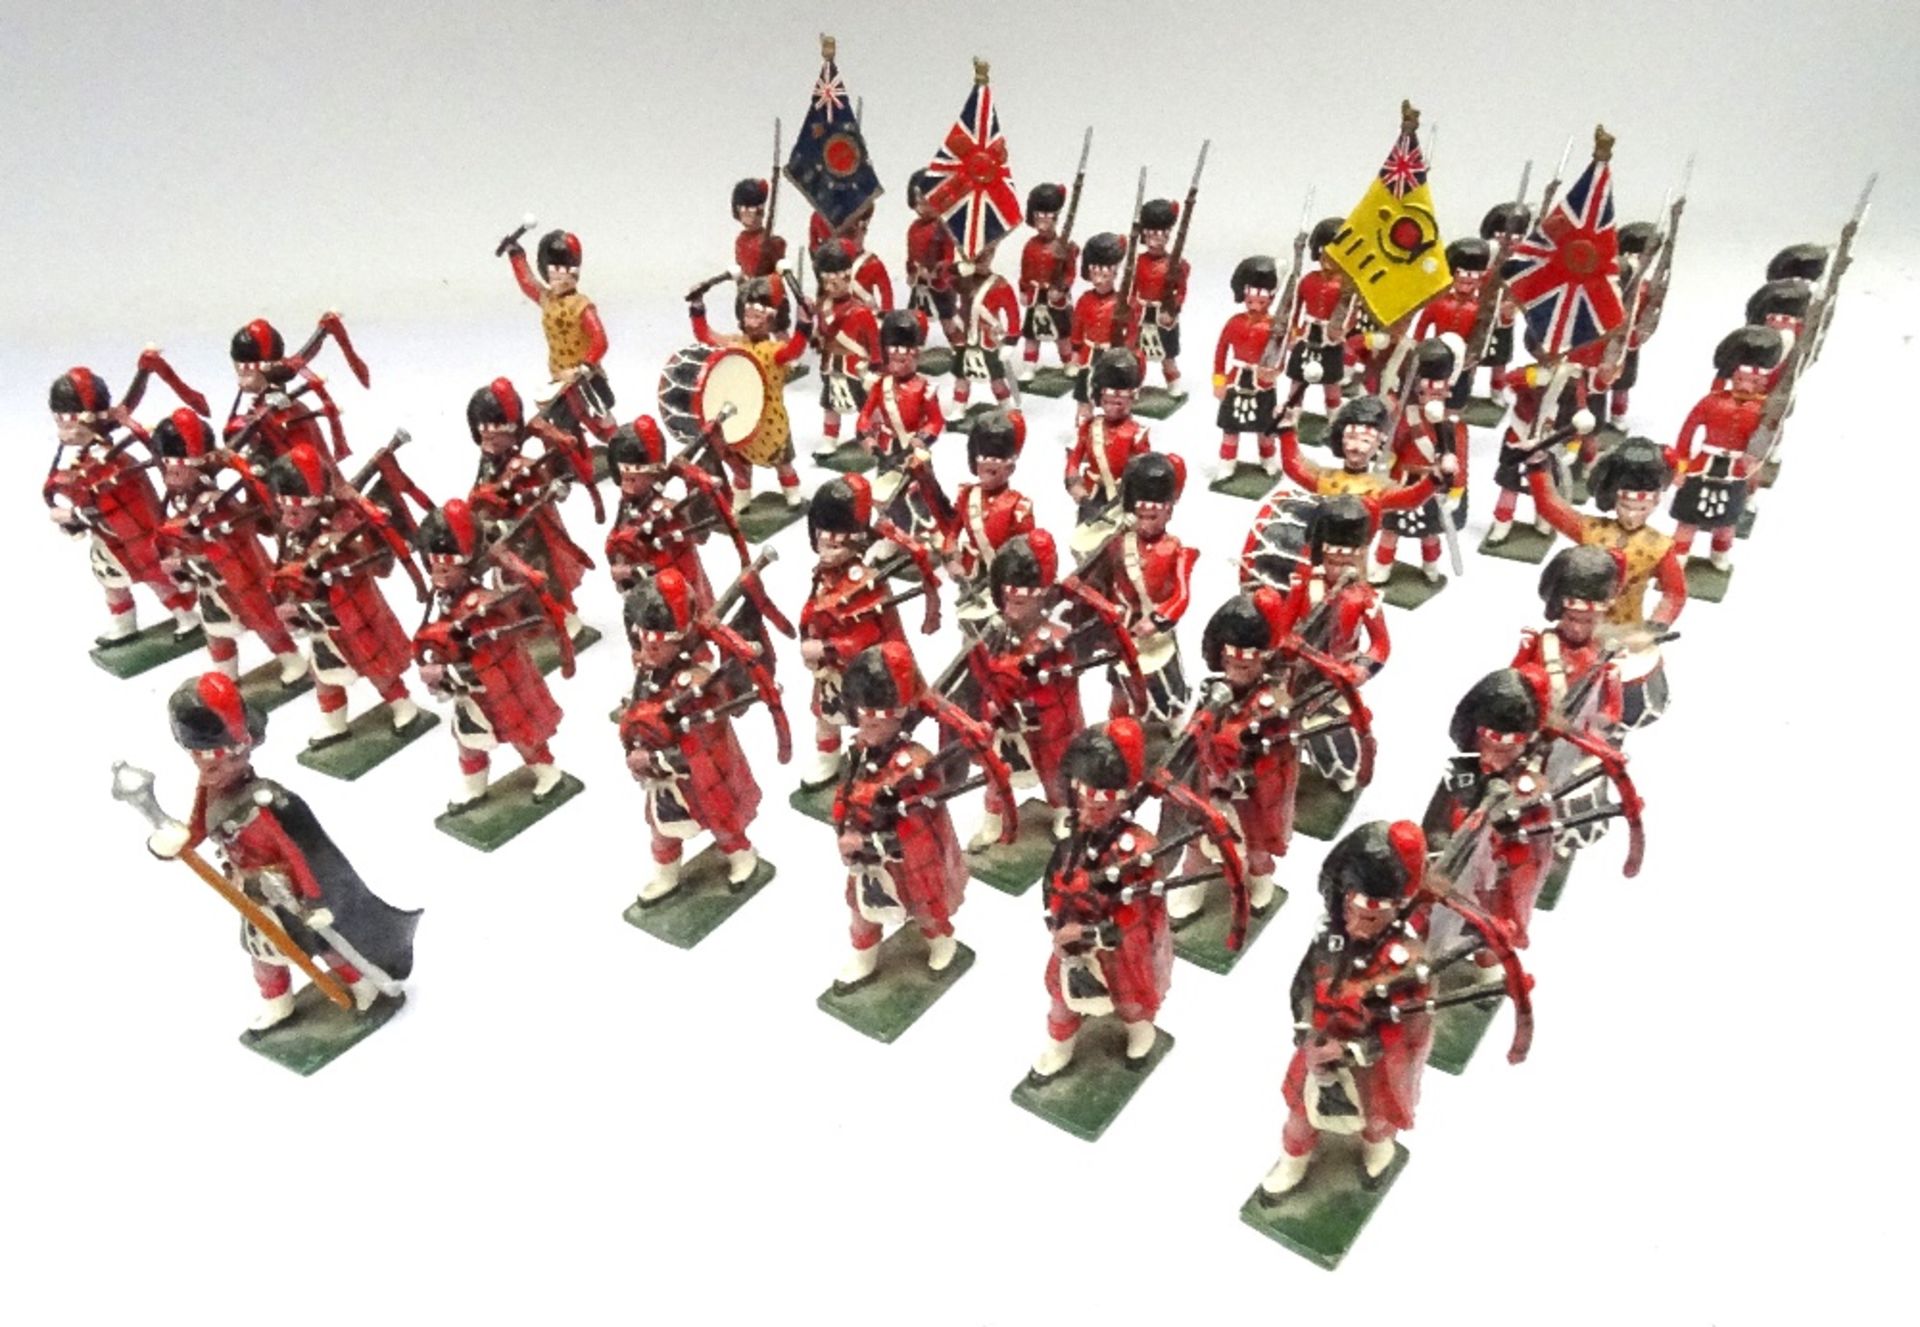 Blenheim and Marlborough Pipes, Drums and Colours of the Black Watch